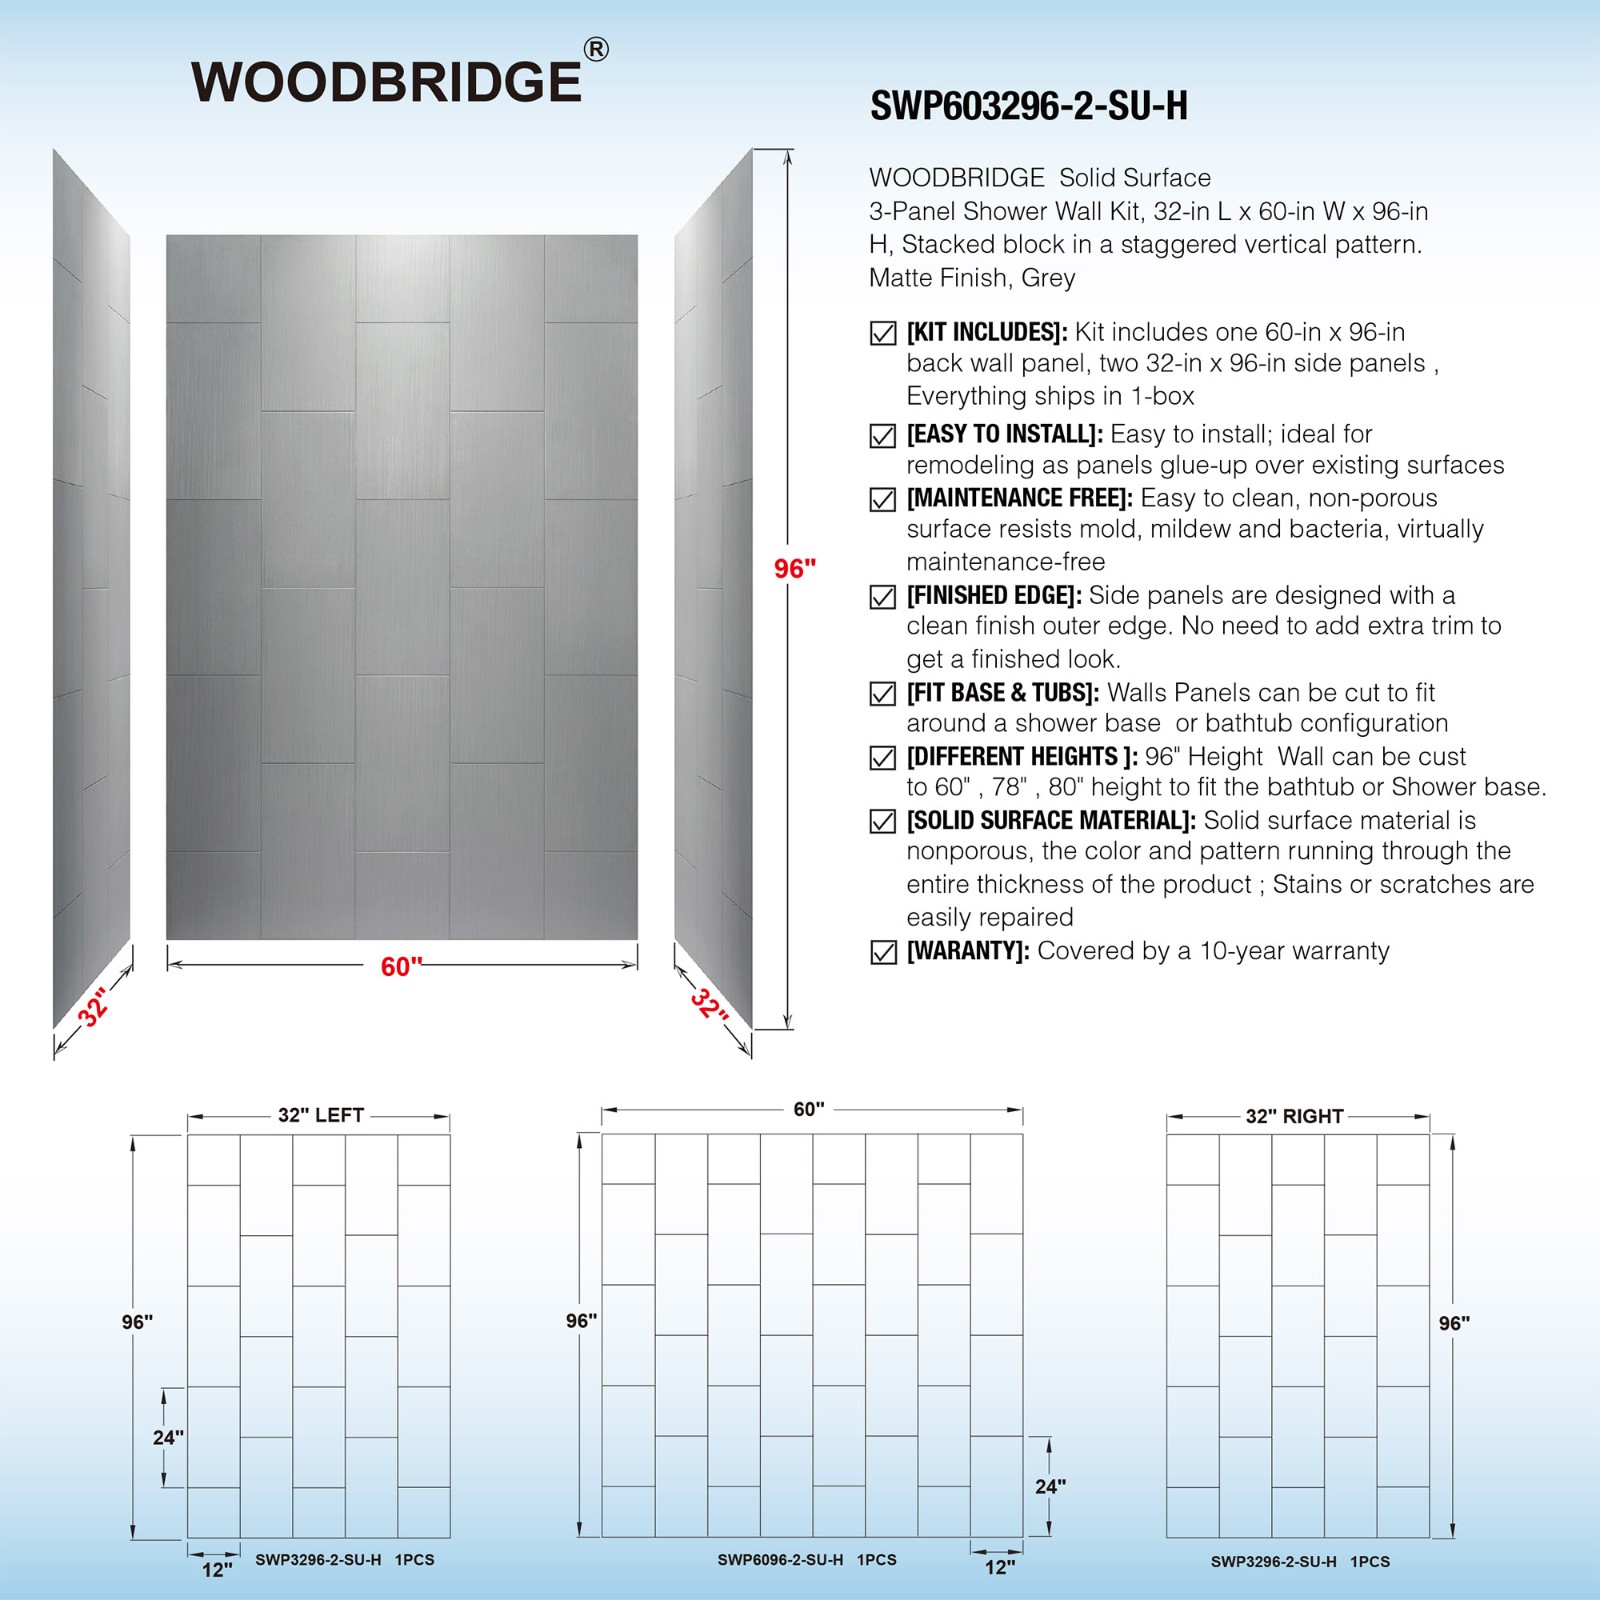  WOODBRIDGE  Solid Surface 3-Panel Shower Wall Kit, 32-in L x 60-in W x 96-in H, Stacked block in a staggered vertical pattern.  Matte Finish, Grey_5283